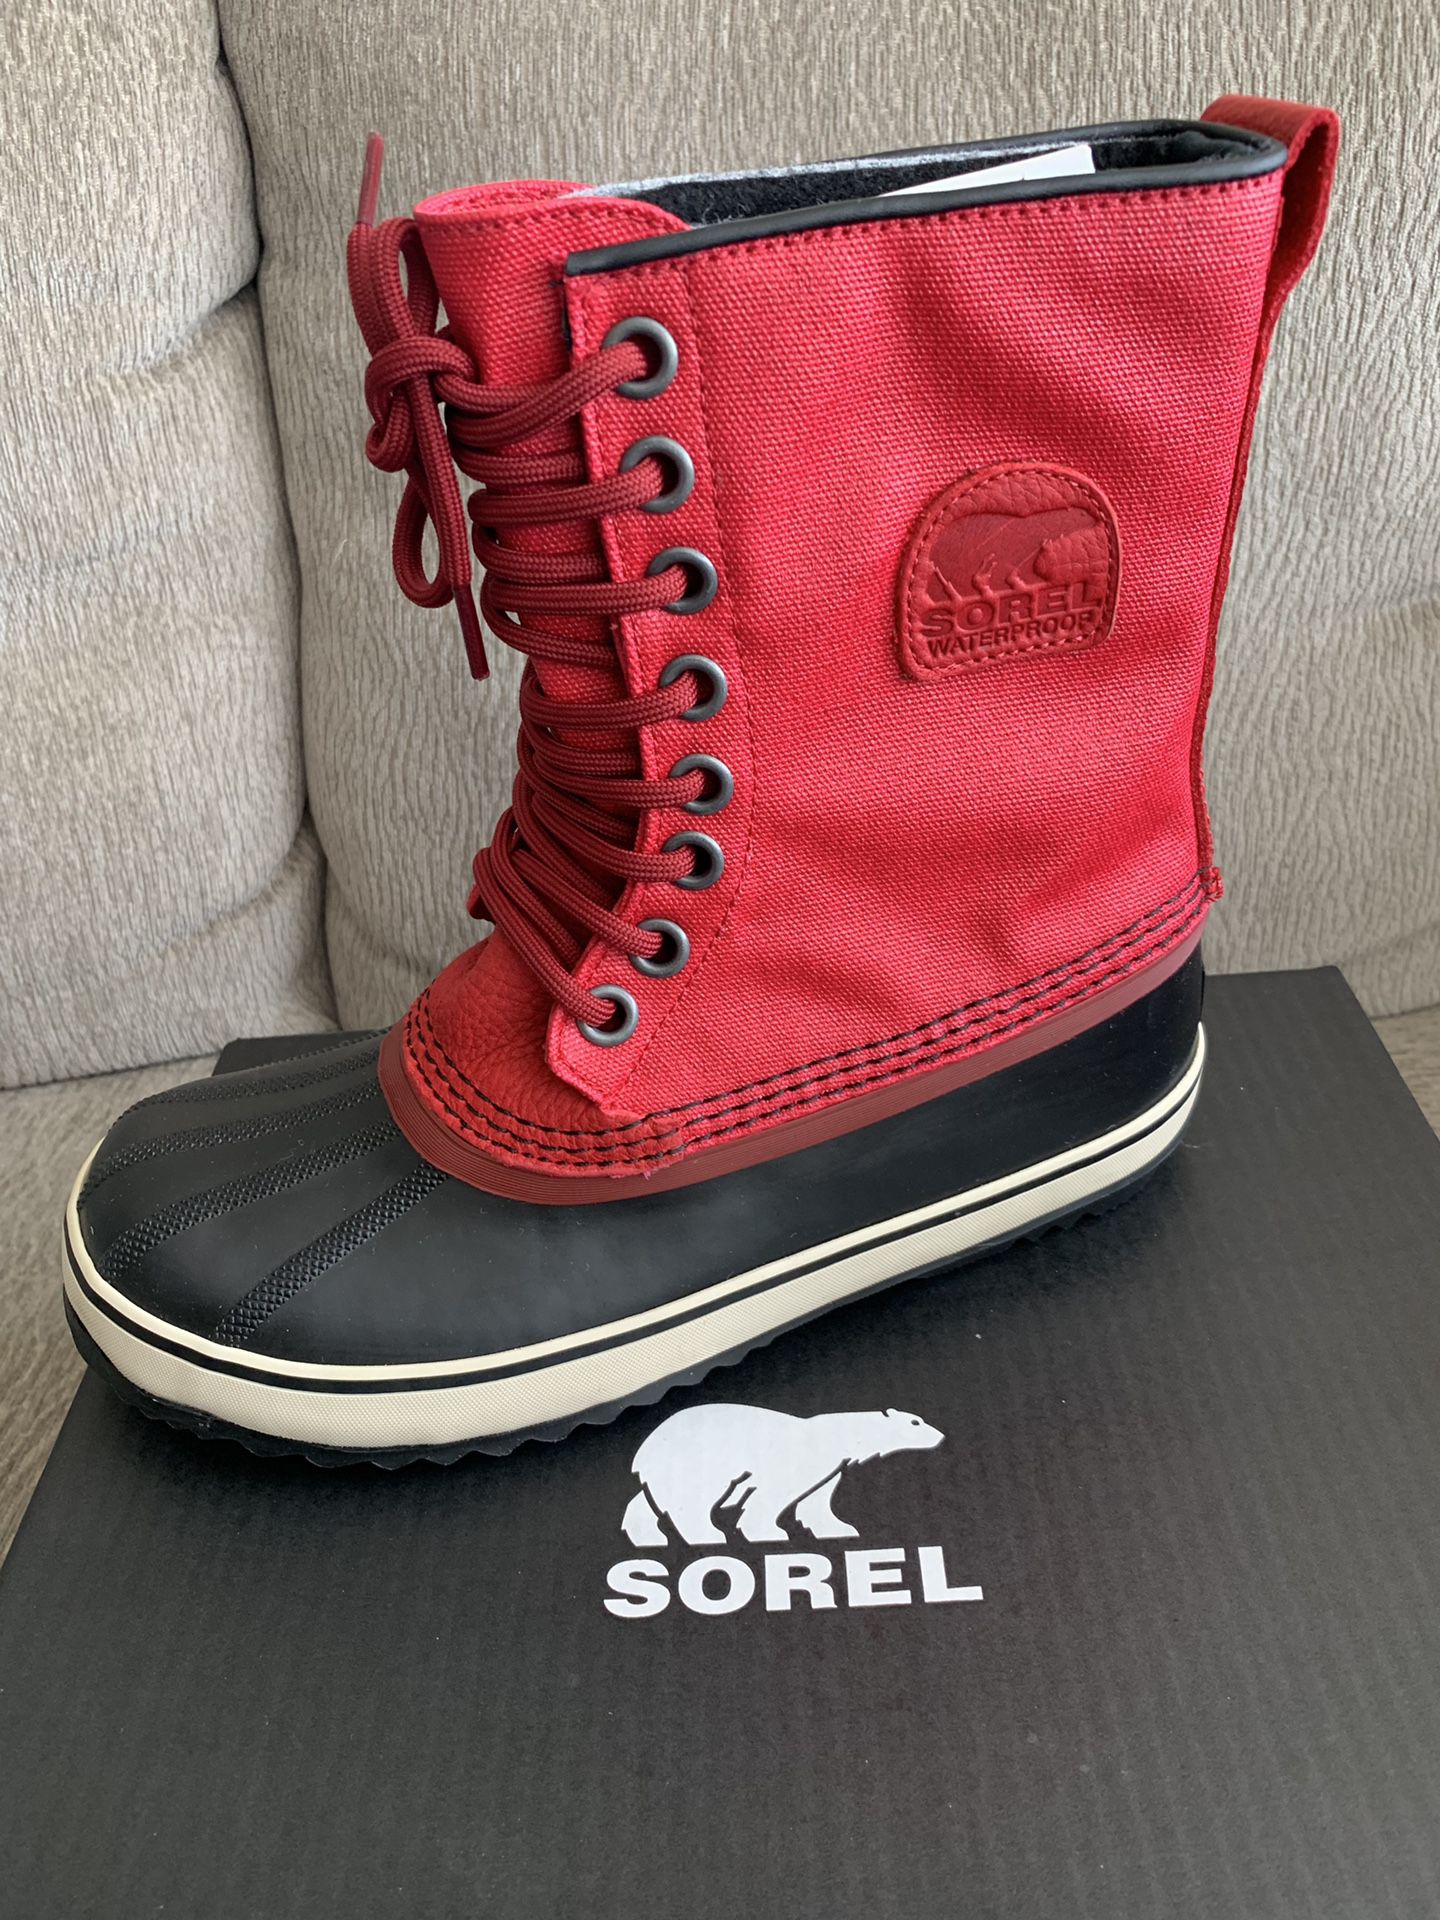 Sorel 1964 Premium CVS Boots in Candy Apple Red